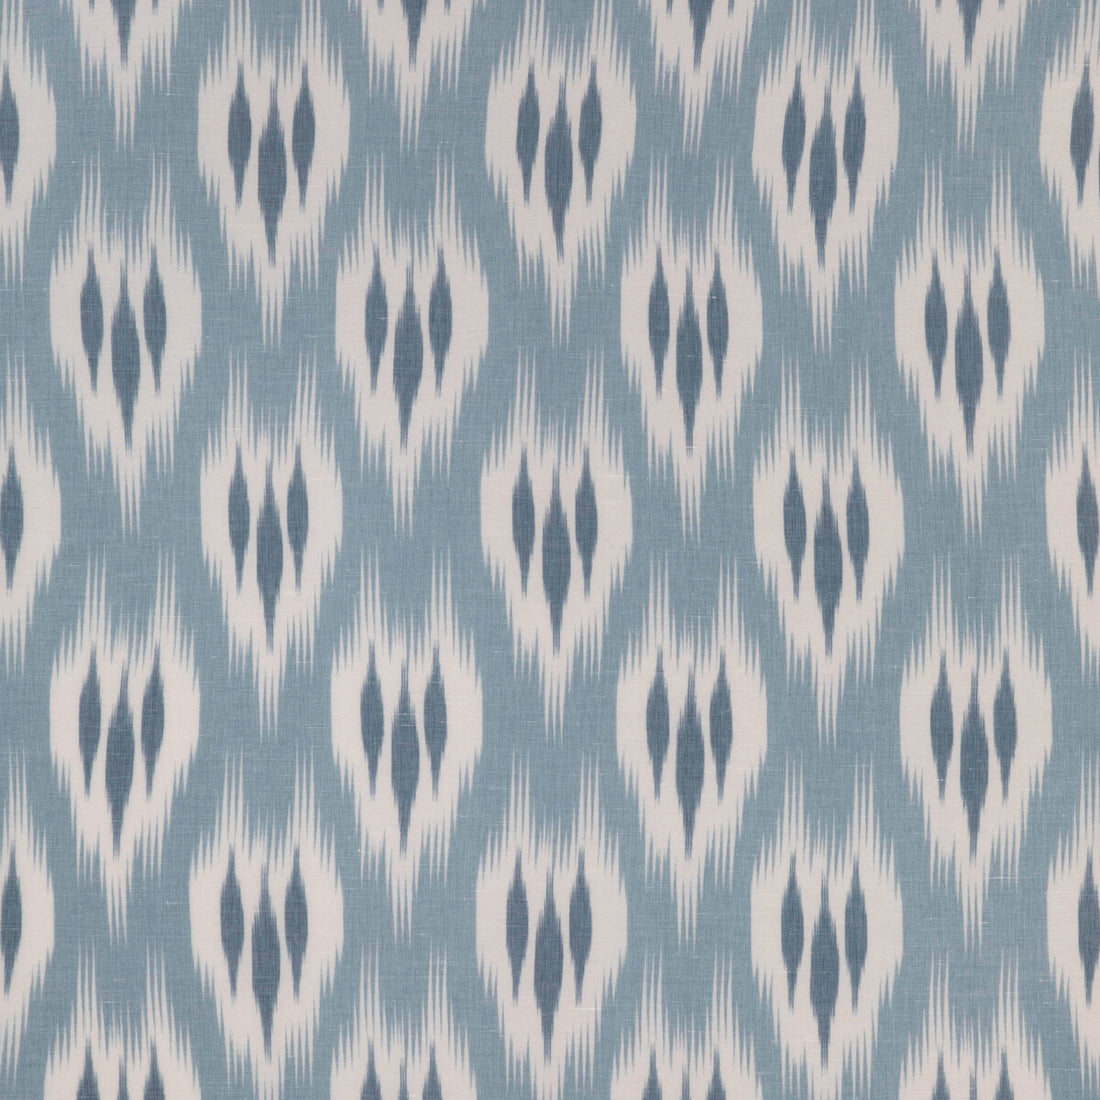 Clare Print fabric in sea color - pattern 2023102.55.0 - by Lee Jofa in the Clare Prints collection